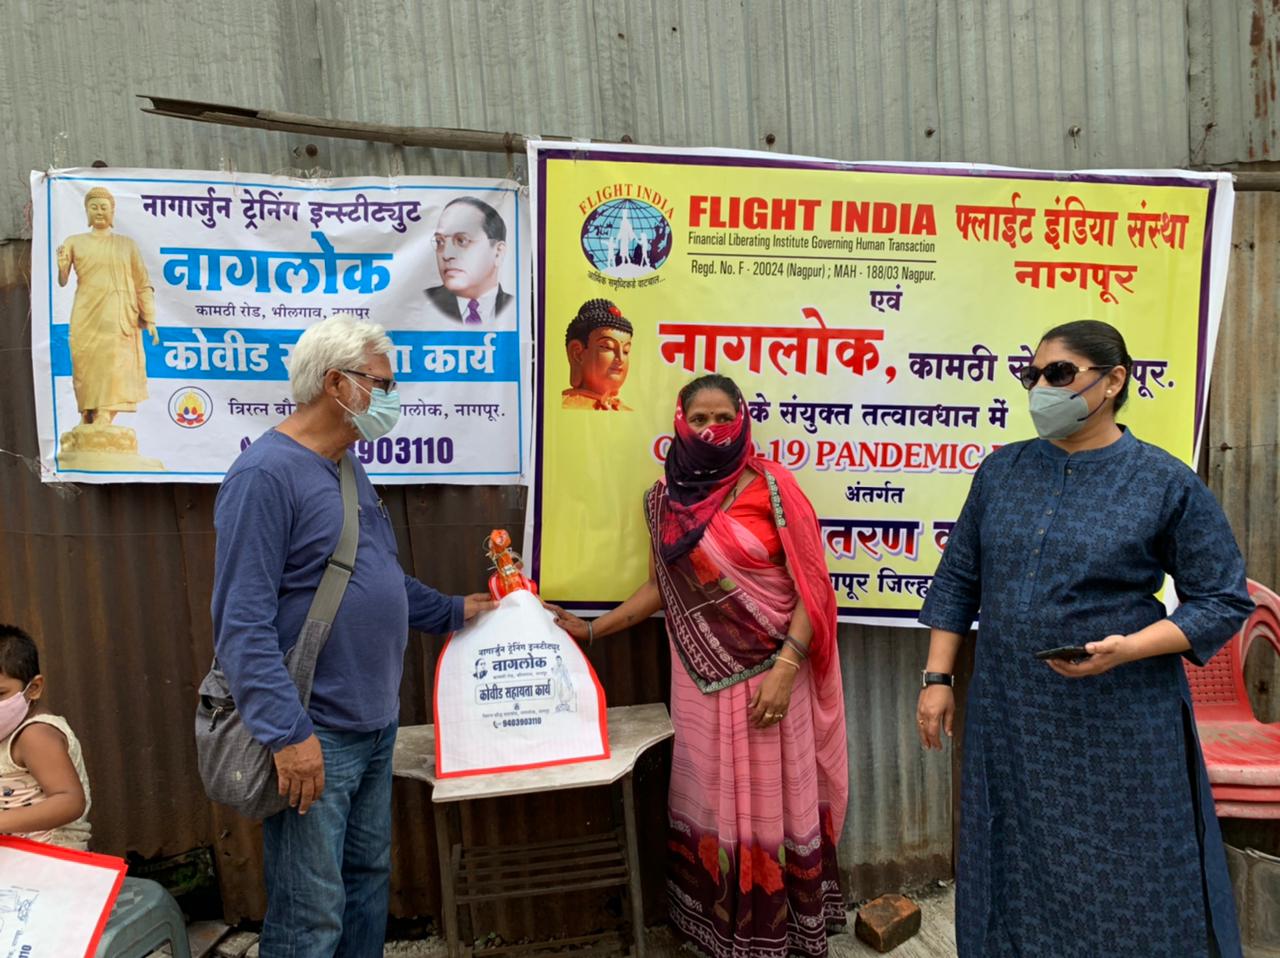 You are currently viewing Ration Kit distribution at Nagpur by Nagaloka and Flight India team